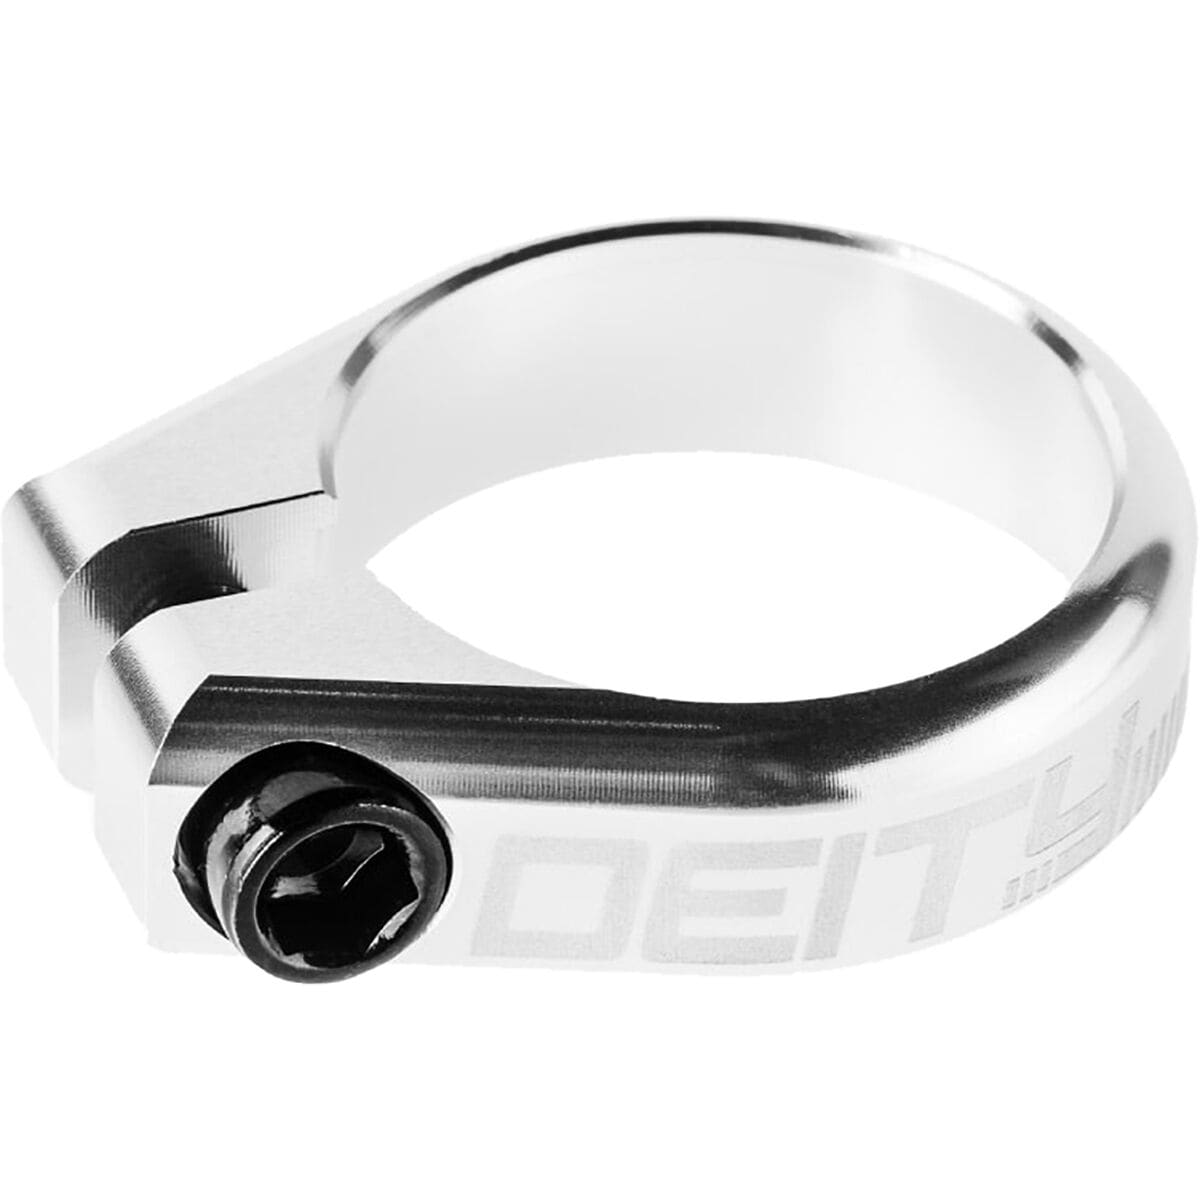 Deity Components Circuit Seatpost Clamp Silver, 38.6MM